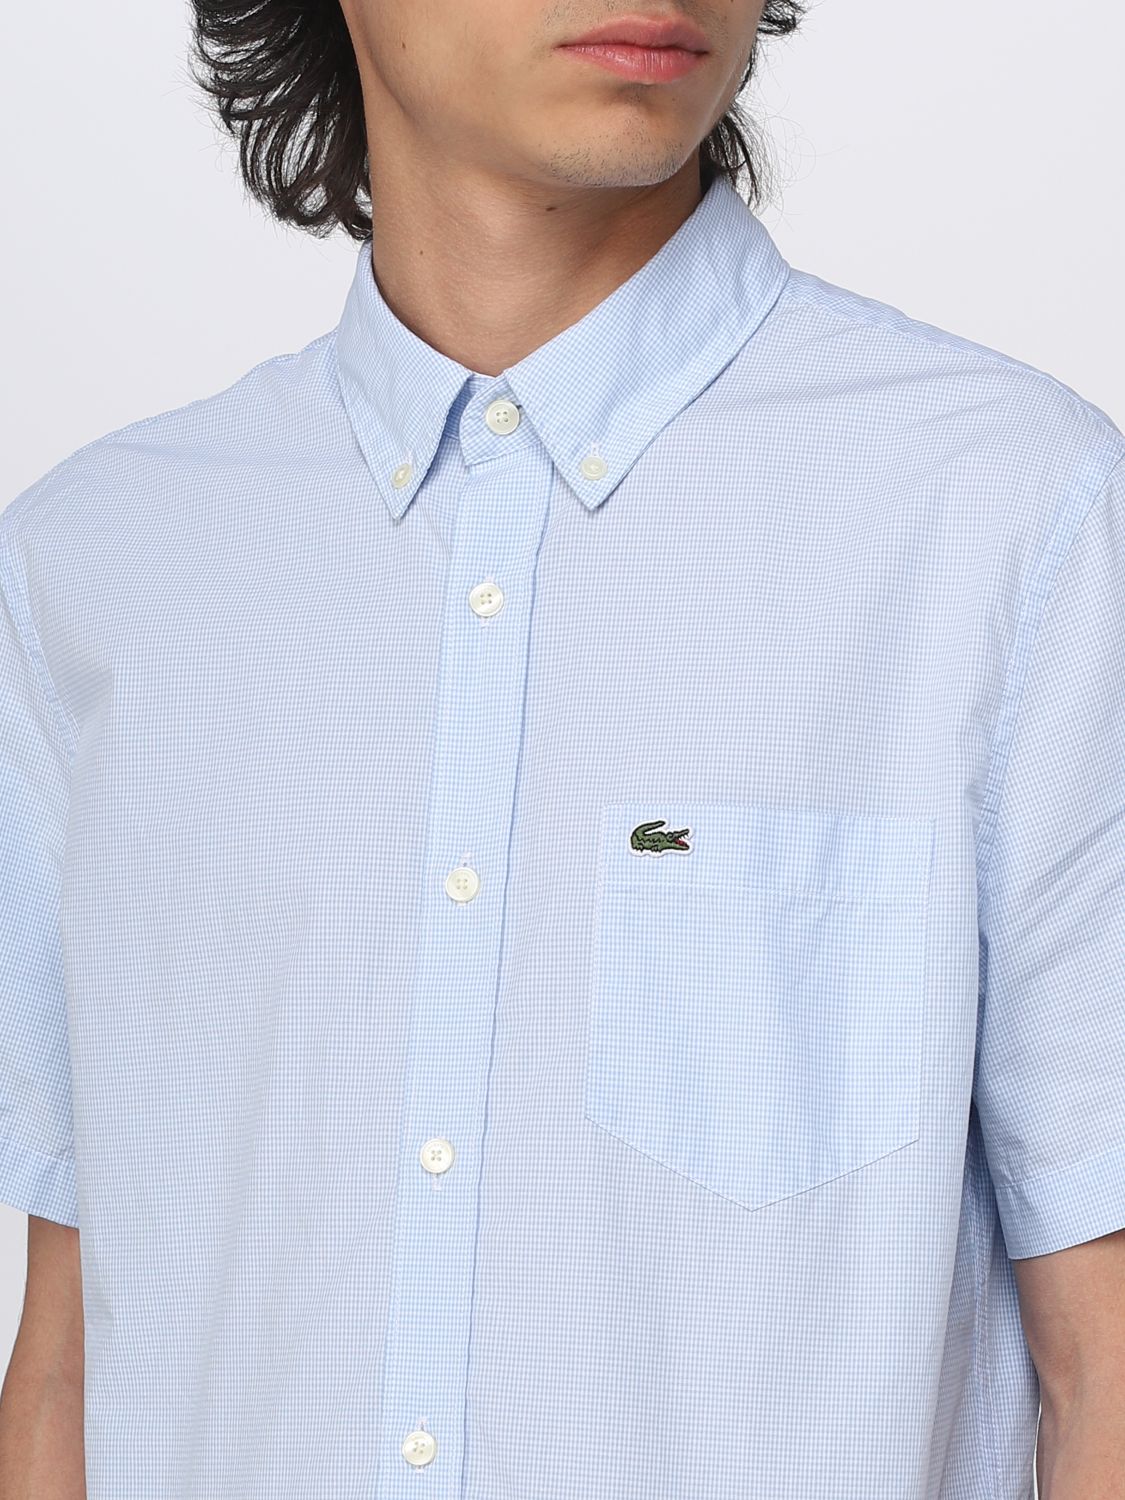 LACOSTE: shirt for man - Green | Lacoste shirt CH2879 online on GIGLIO.COM